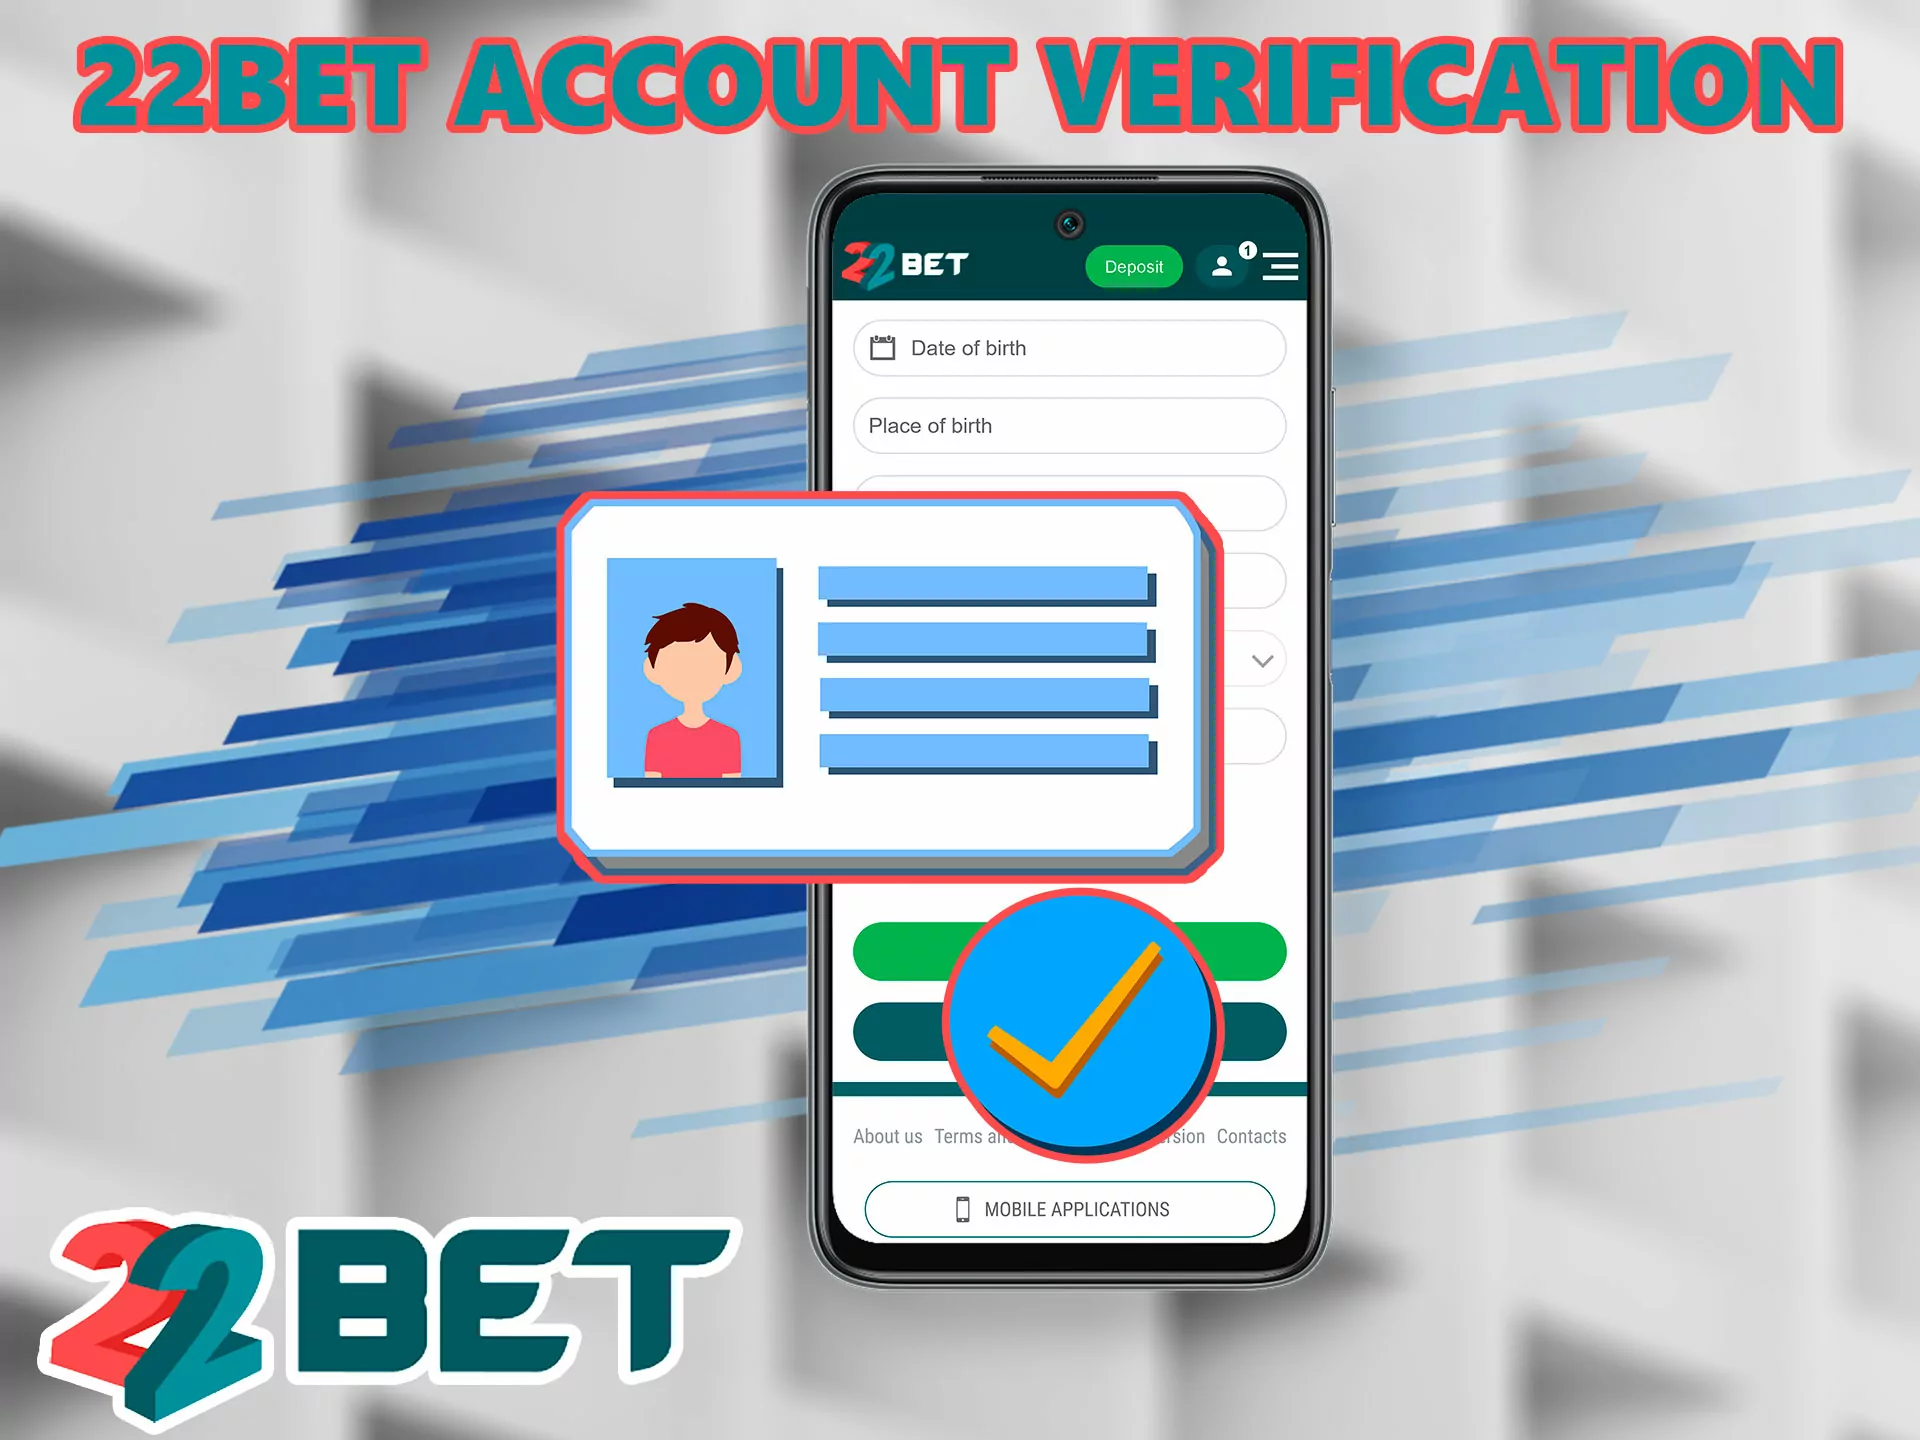 This procedure is standard for all bookmakers, without going through it you will not be able to withdraw the won money.